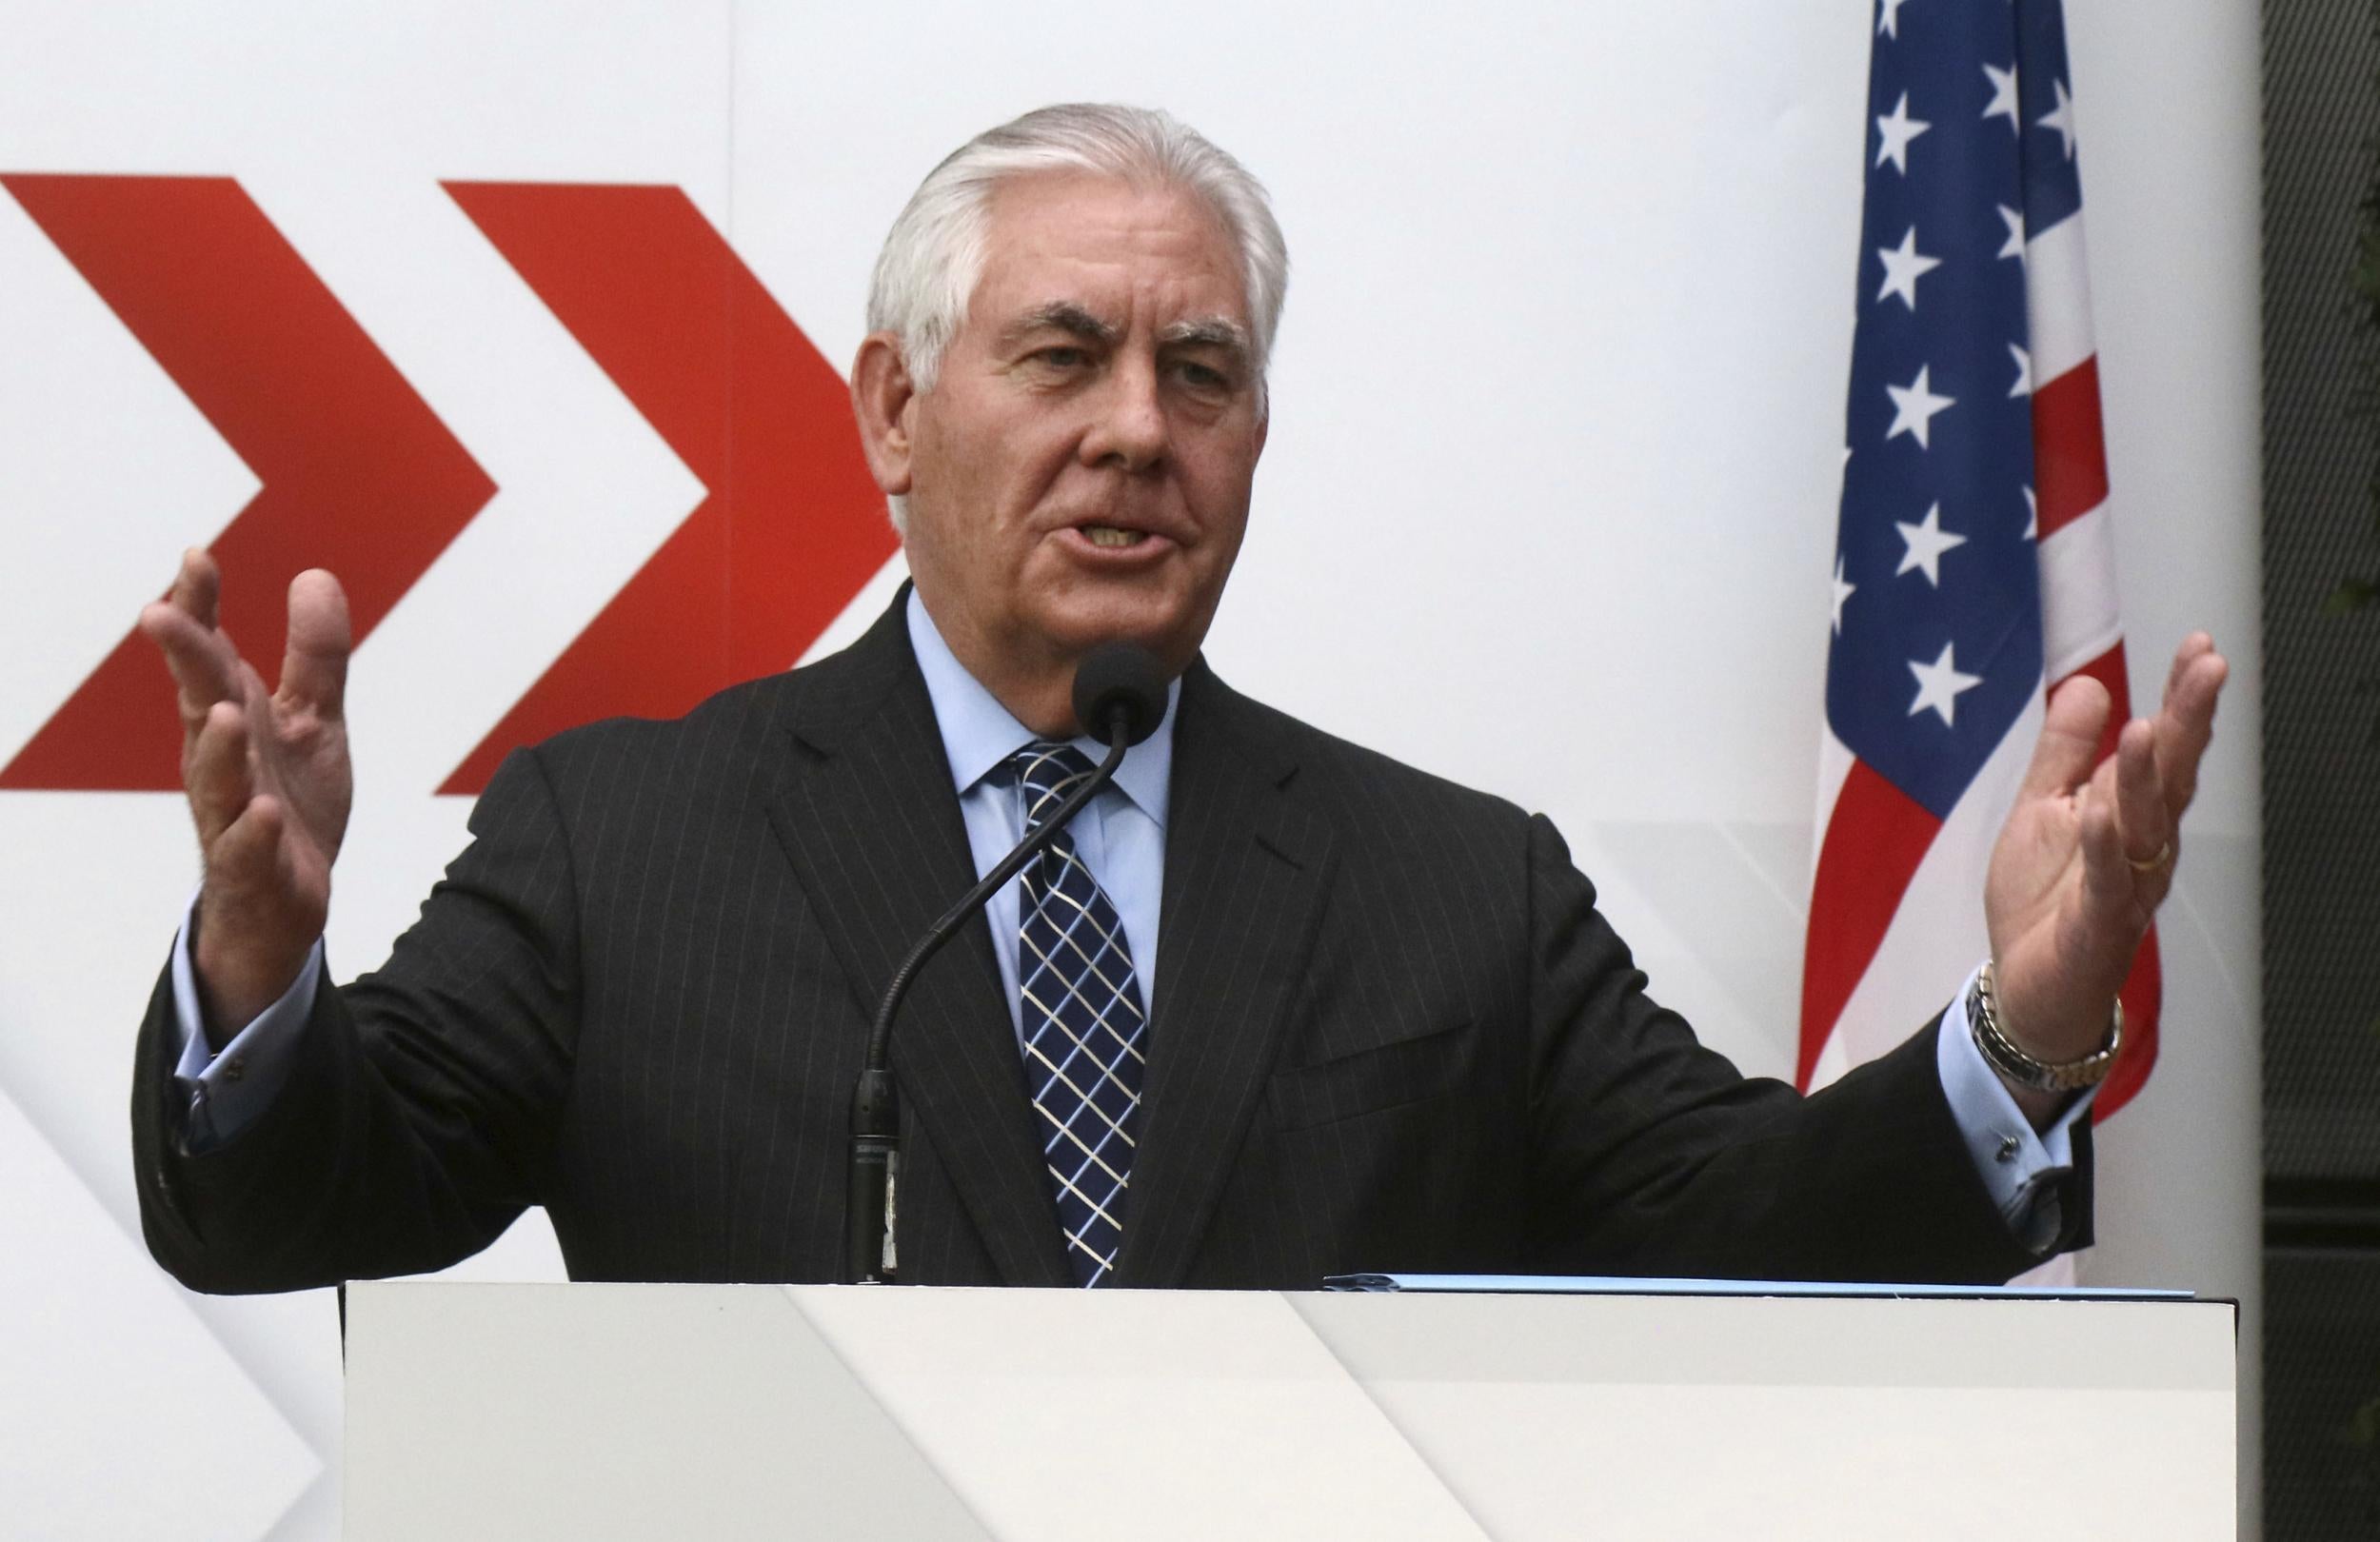 U.S. Secretary of State Rex Tillerson speaks at the OSCE Foreign Ministers in Vienna, Austria, Thursday, Dec. 7, 2017